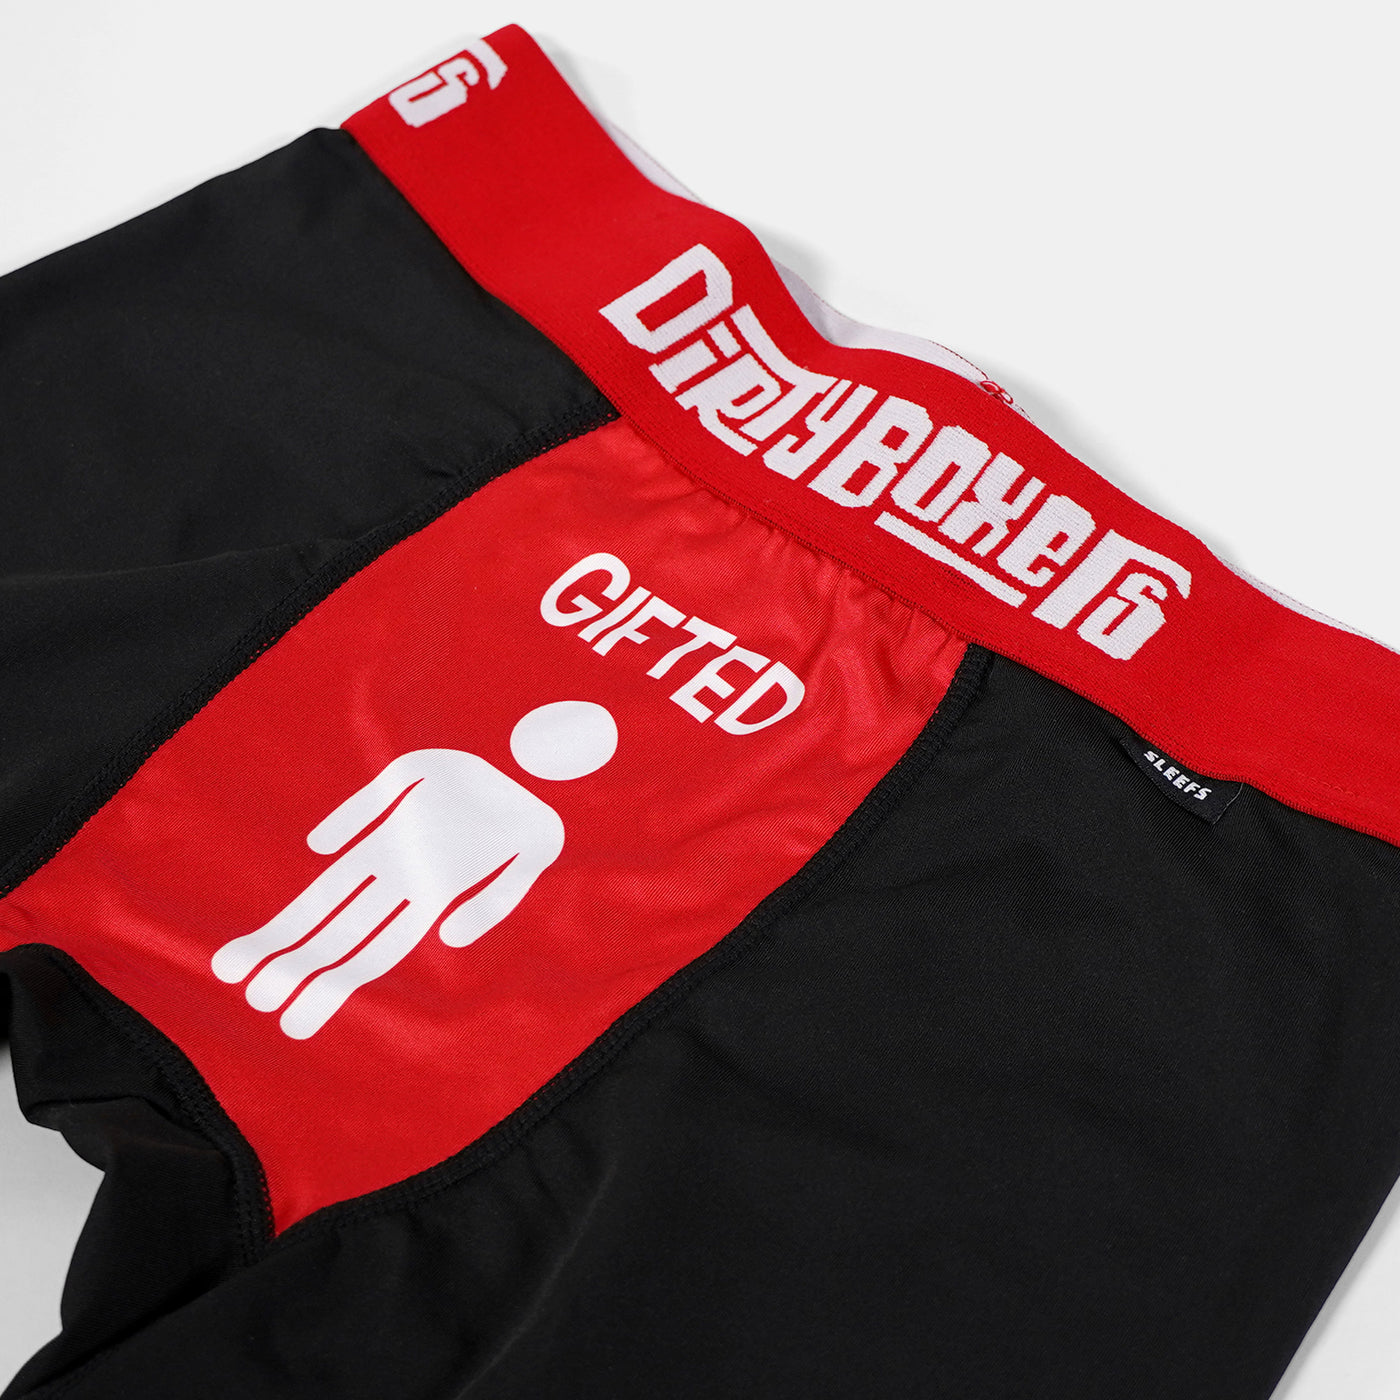 Gifted Dirty Boxers Men's Underwear